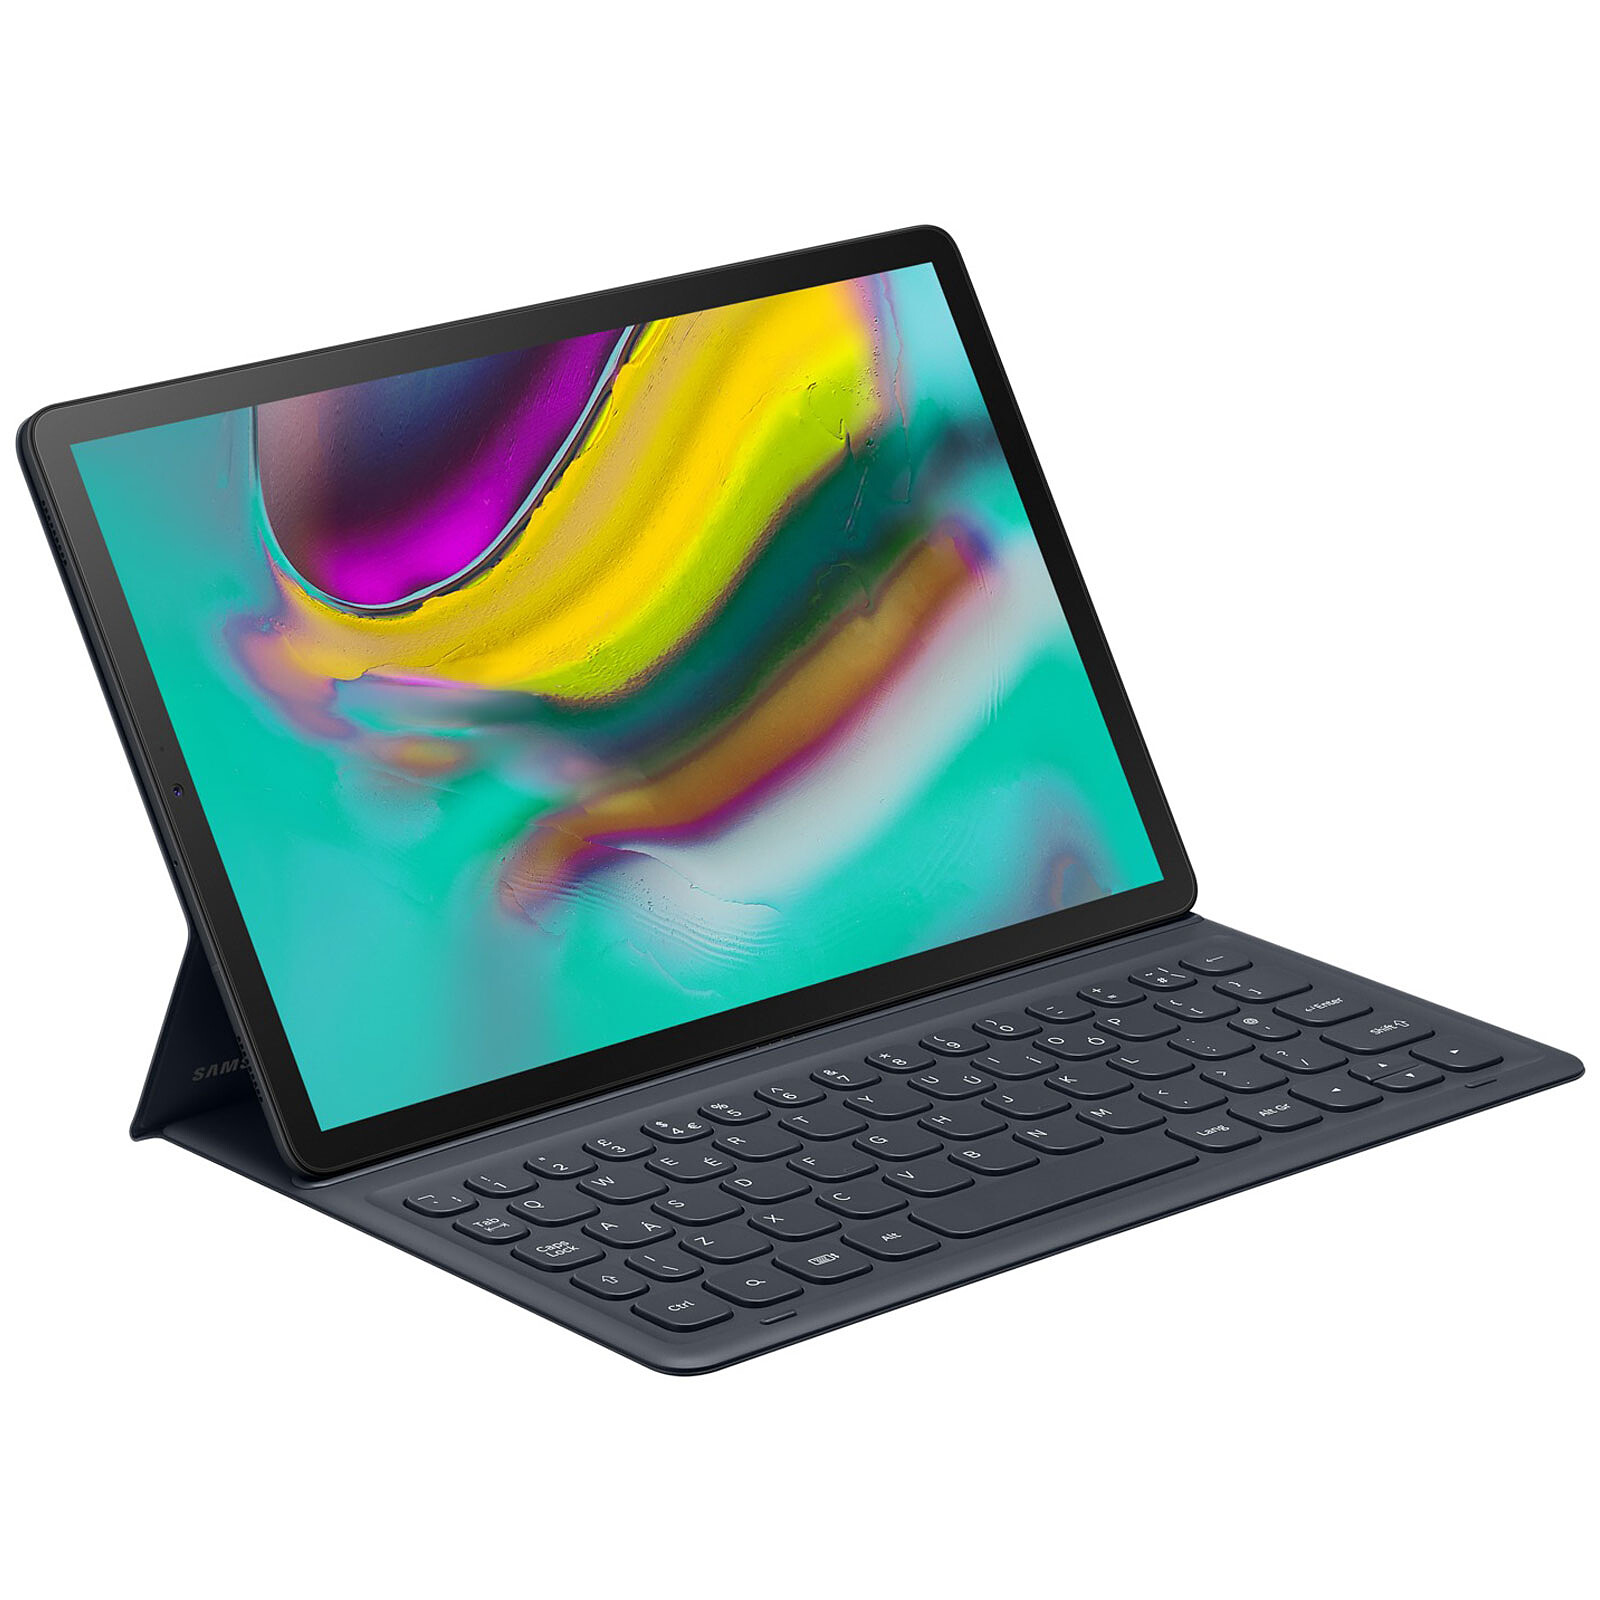 Violet Labanema Galaxy Tab S5E Clavier Coque Ultra-Thin QWERTY Clavier sans Fil Wireless Stand Housse pour 10.5 Samsung Galaxy Tab S5E T720 T725 Tablette 